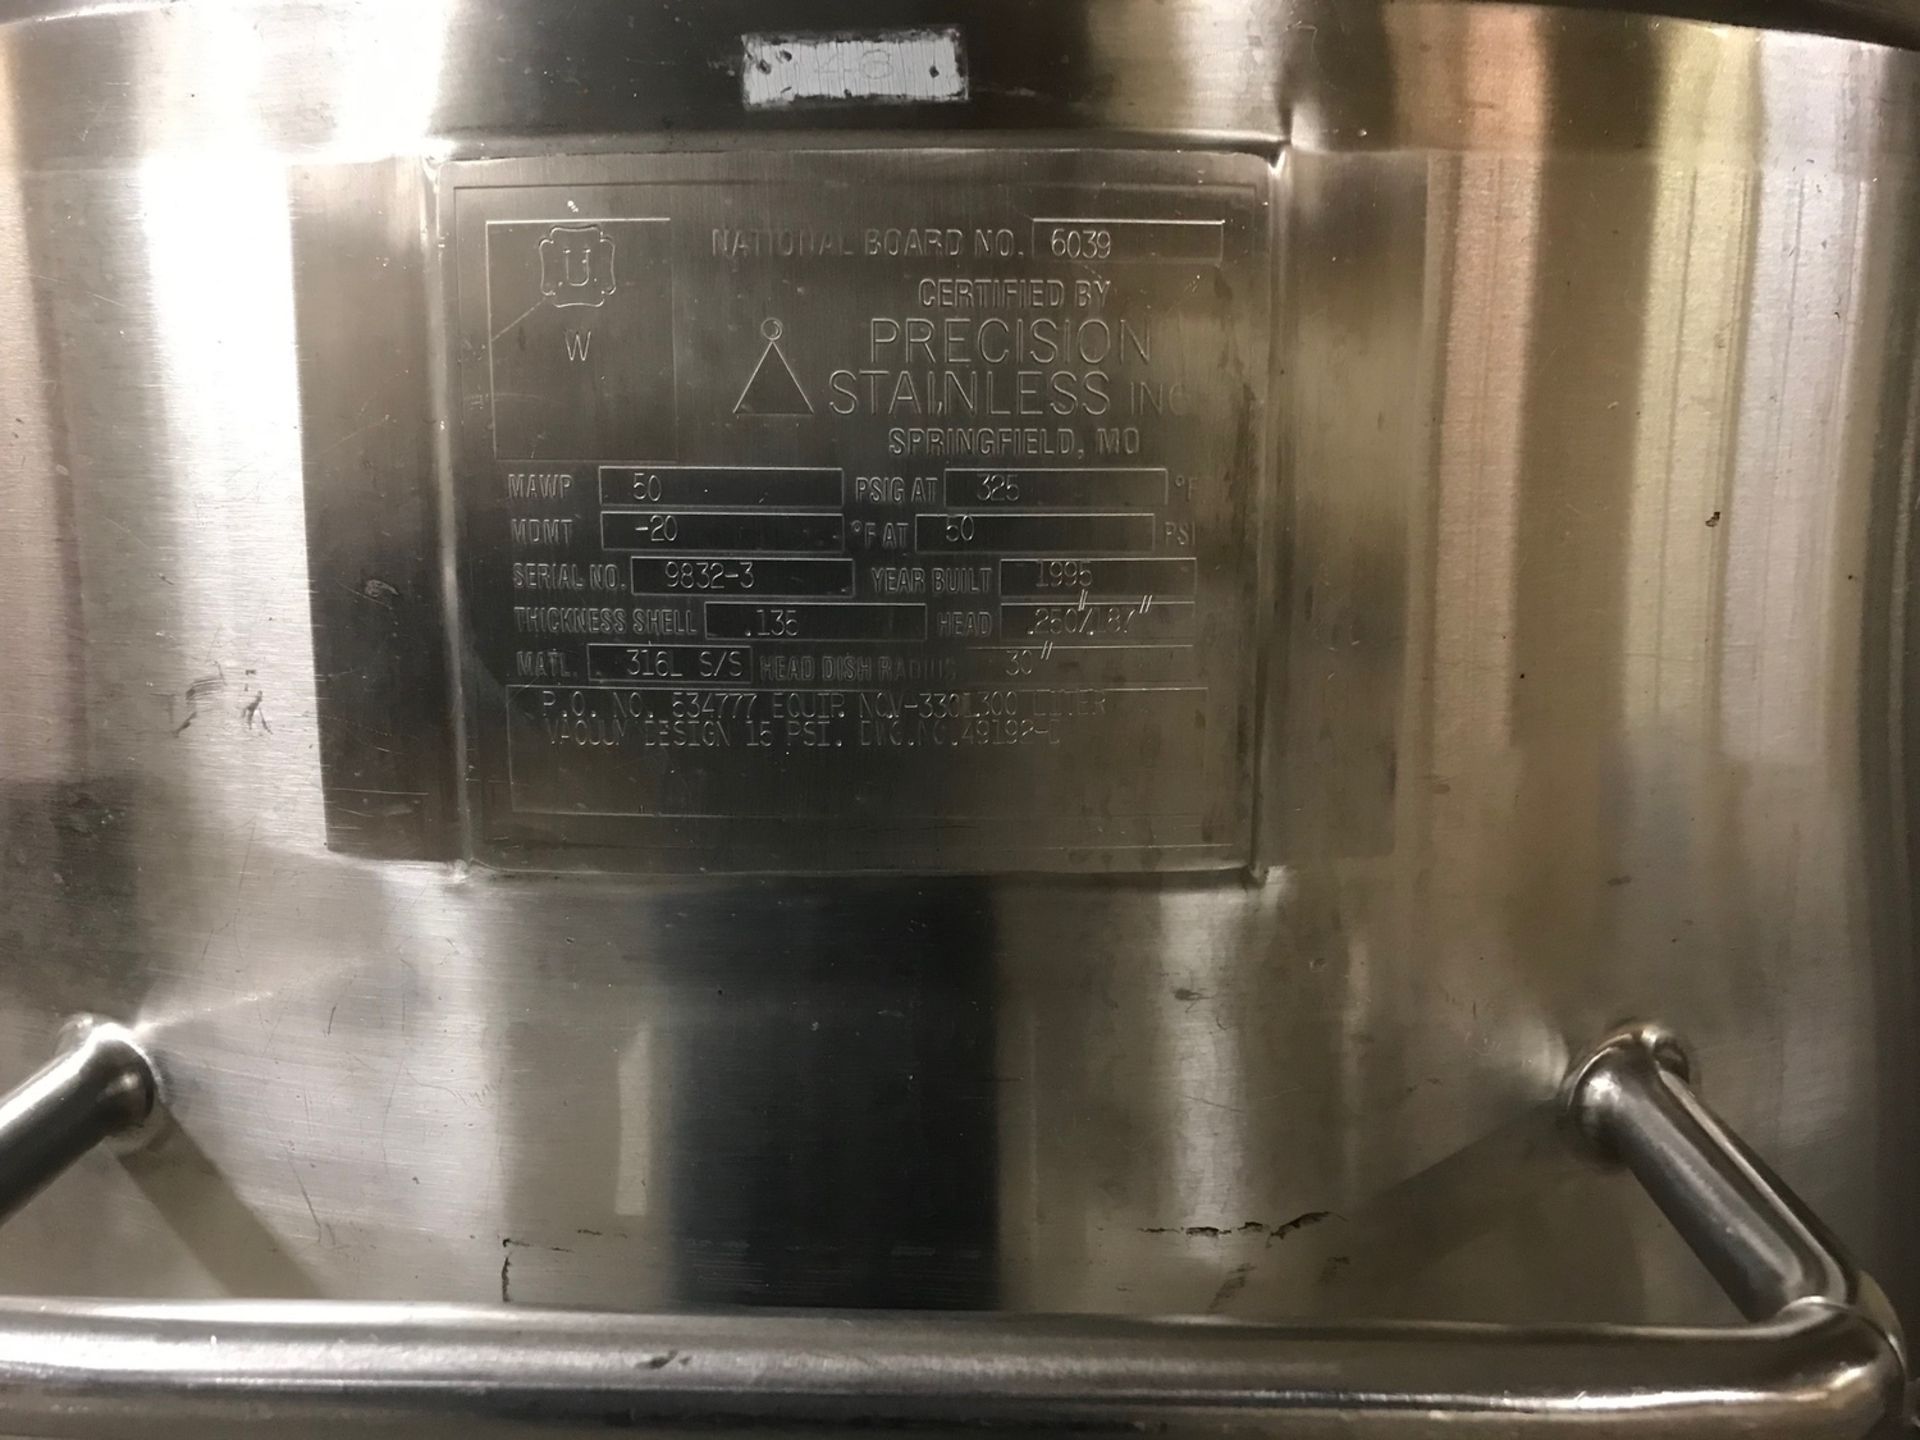 Precision Stainless 80 Gallon 3/6 Stainless Steel Dome Top, Dish Bottom, Insulated Pressure Tank - Image 2 of 2